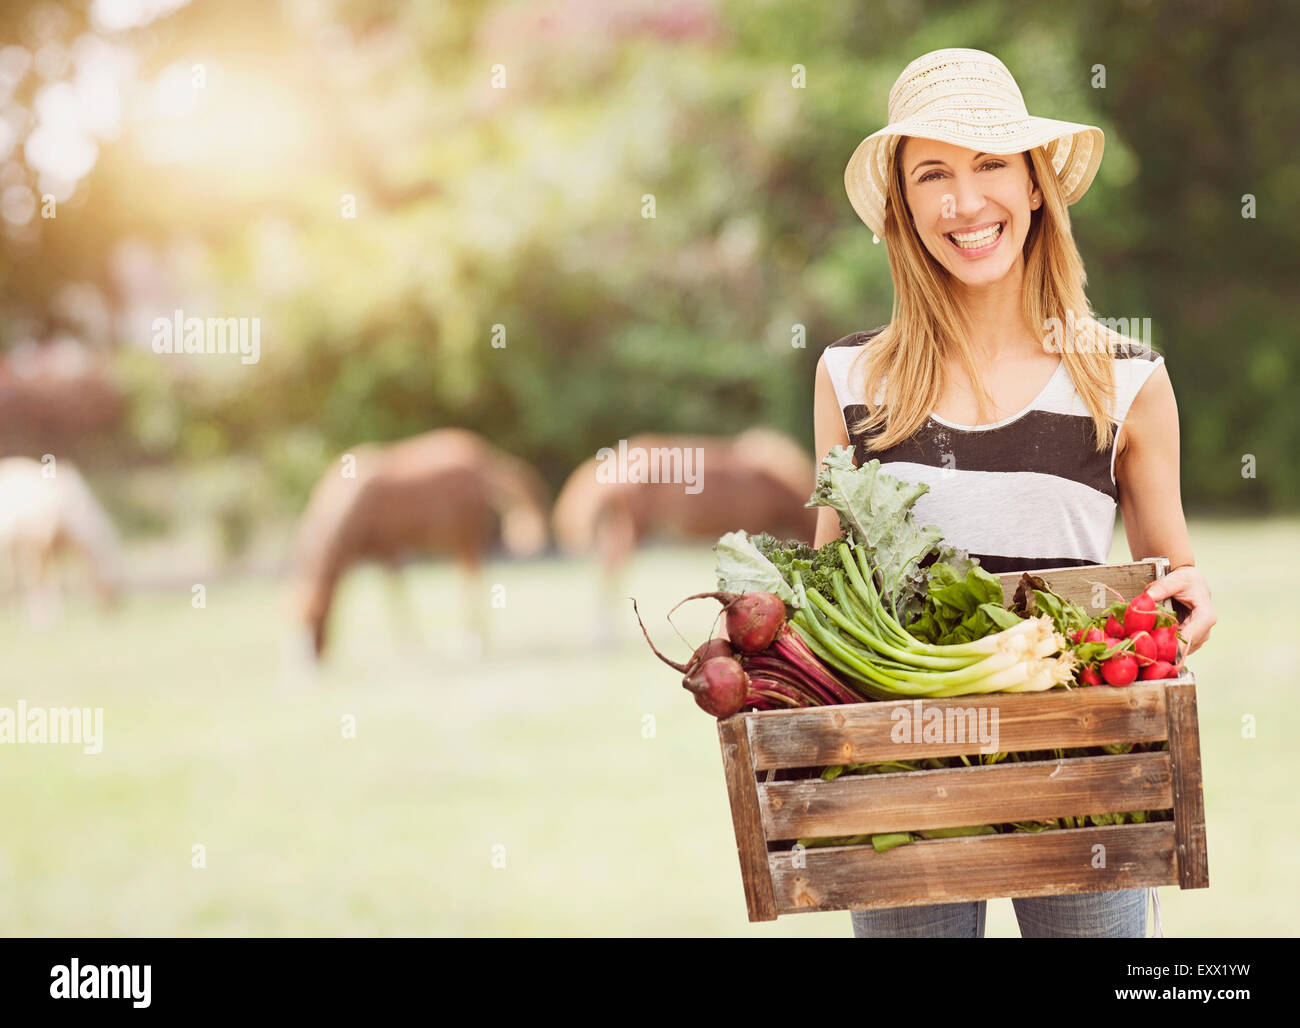 Woman carrying fresh vegetables in box Stock Photo